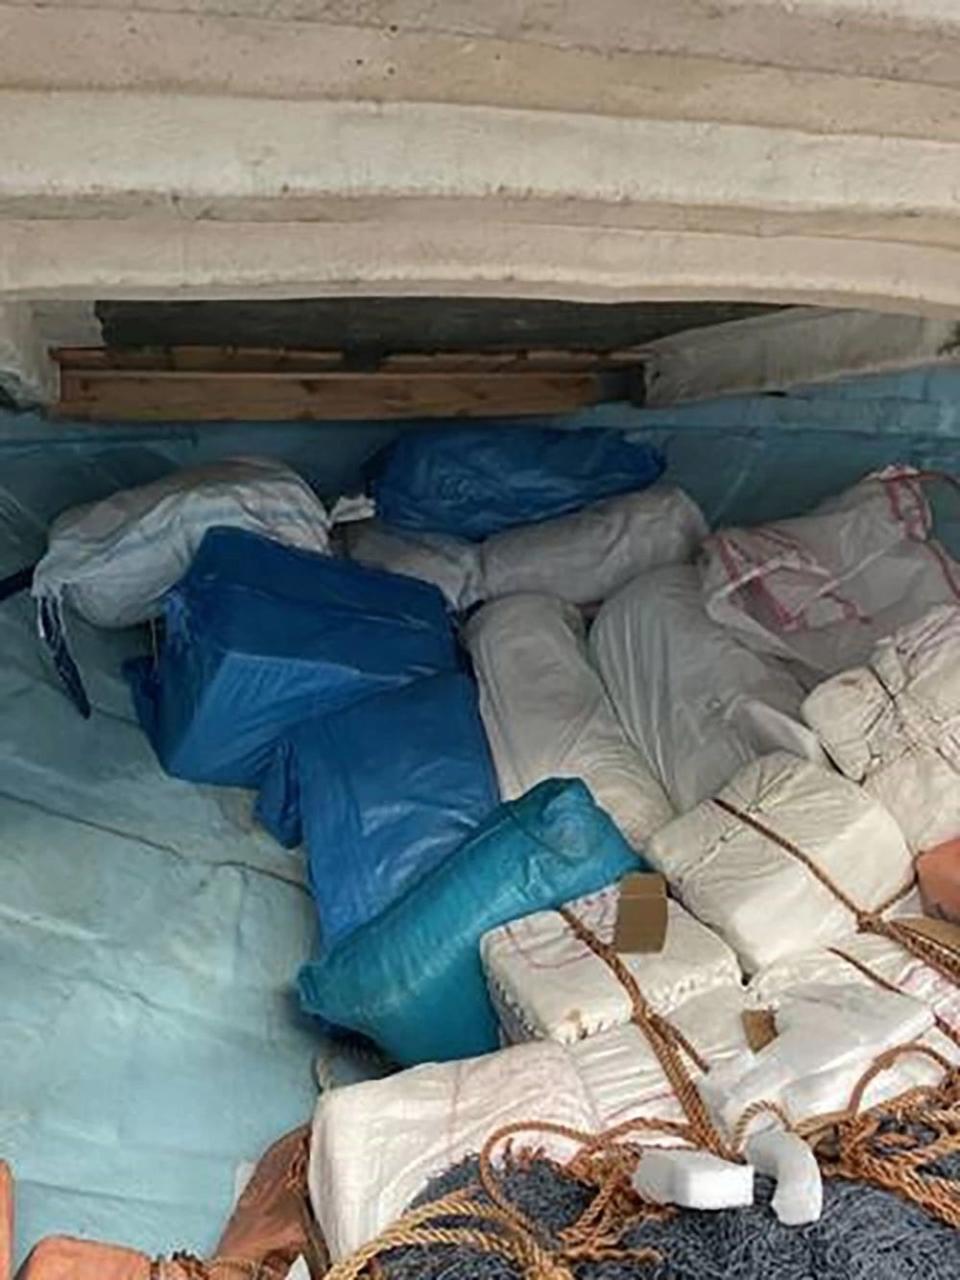 wrapped cargo packages aboard a dhow